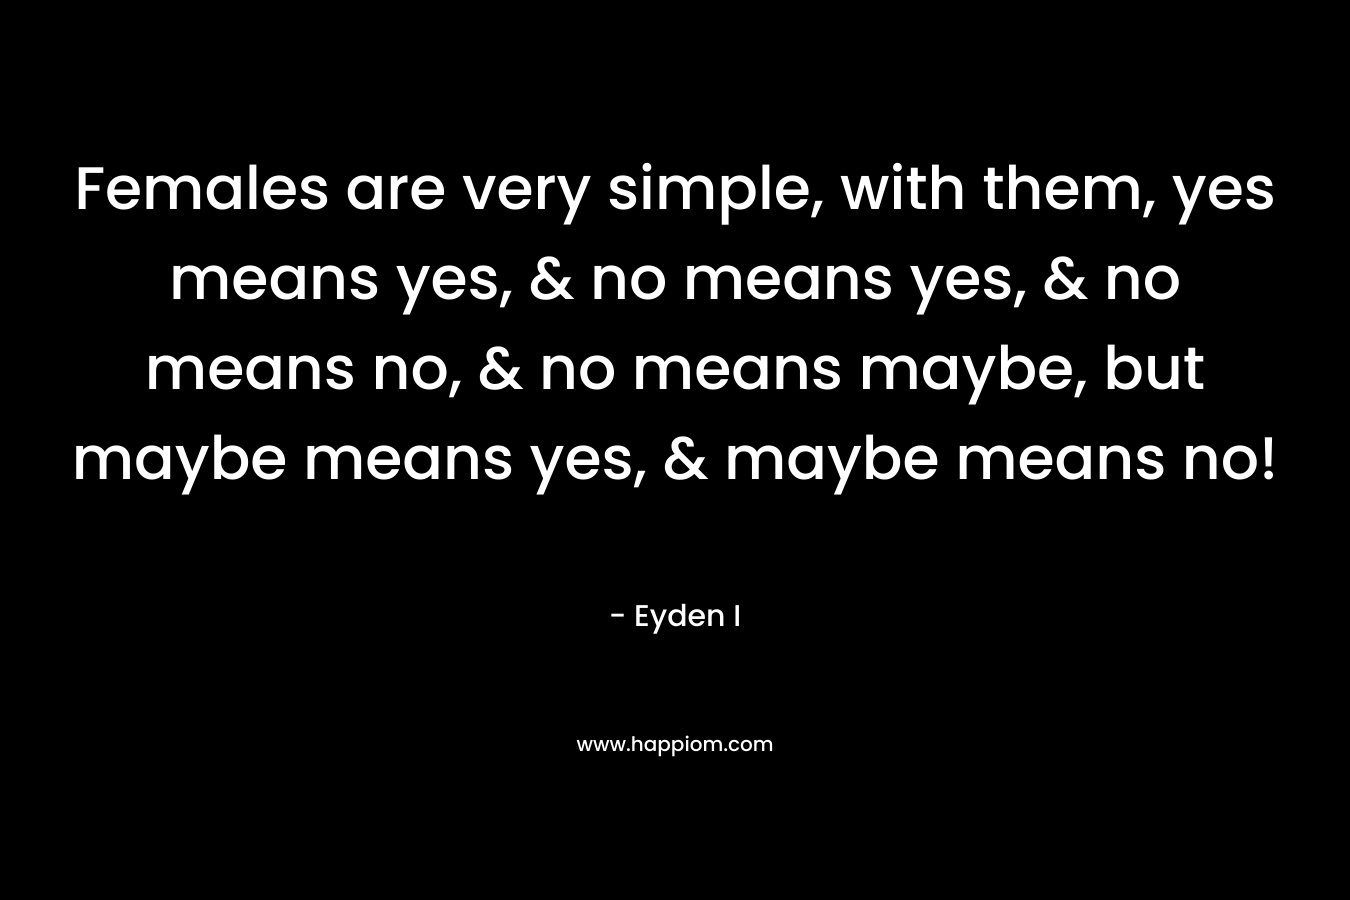 Females are very simple, with them, yes means yes, & no means yes, & no means no, & no means maybe, but maybe means yes, & maybe means no!